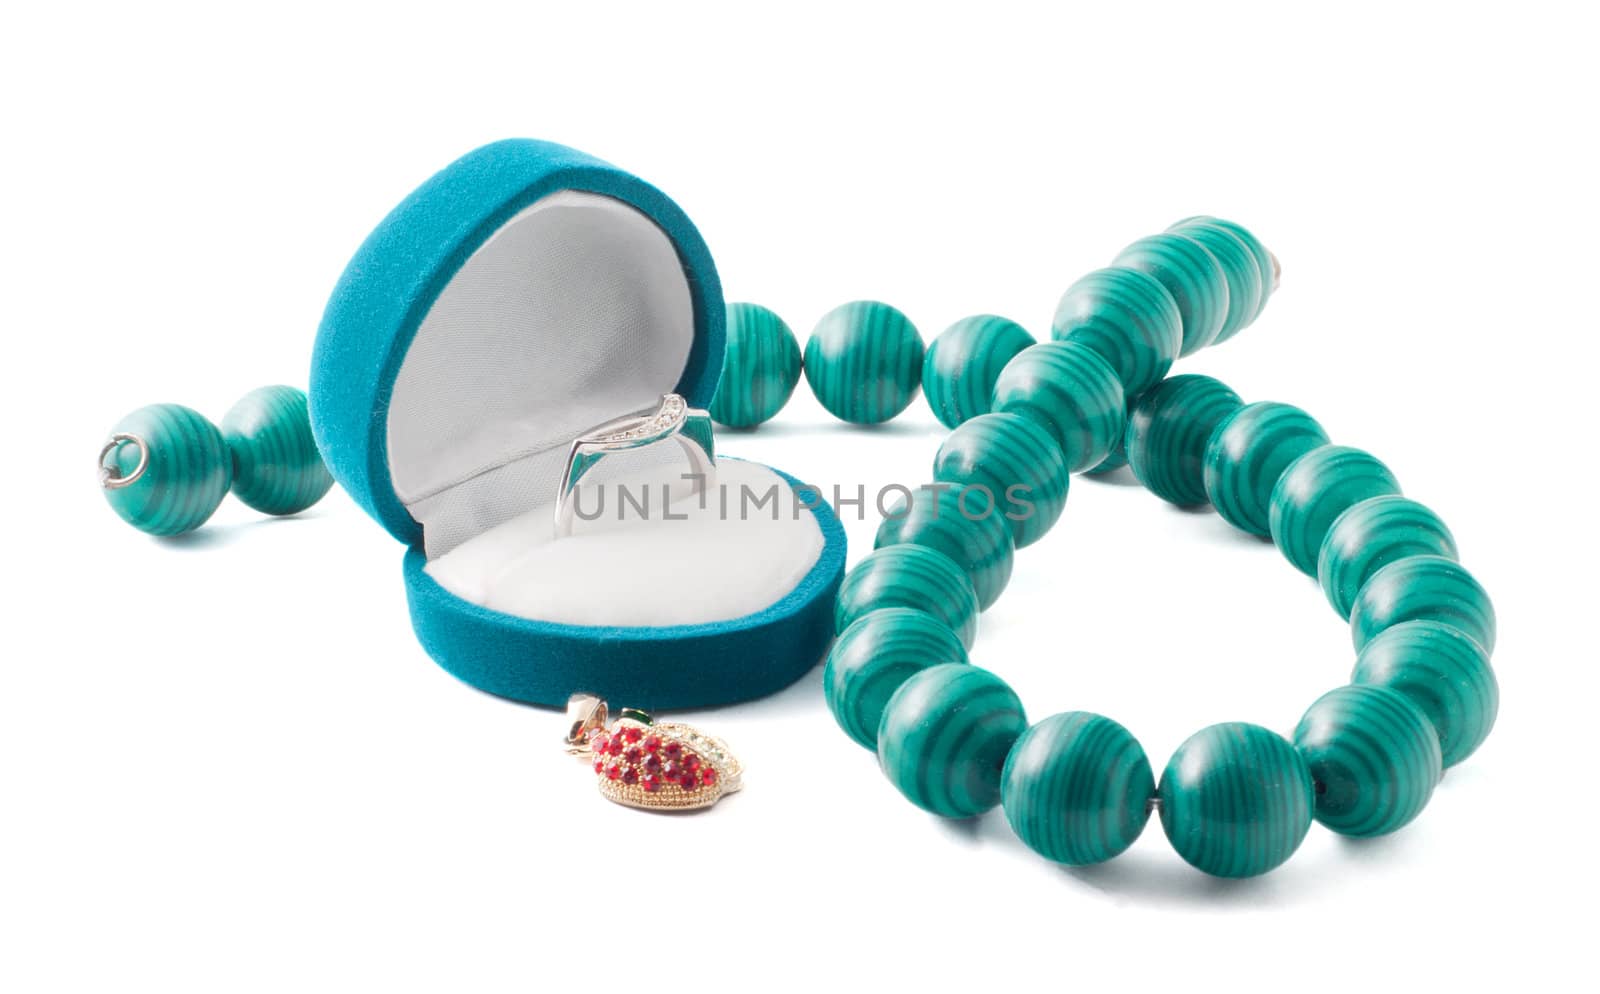 jewel box with ring and beads by nigerfoxy